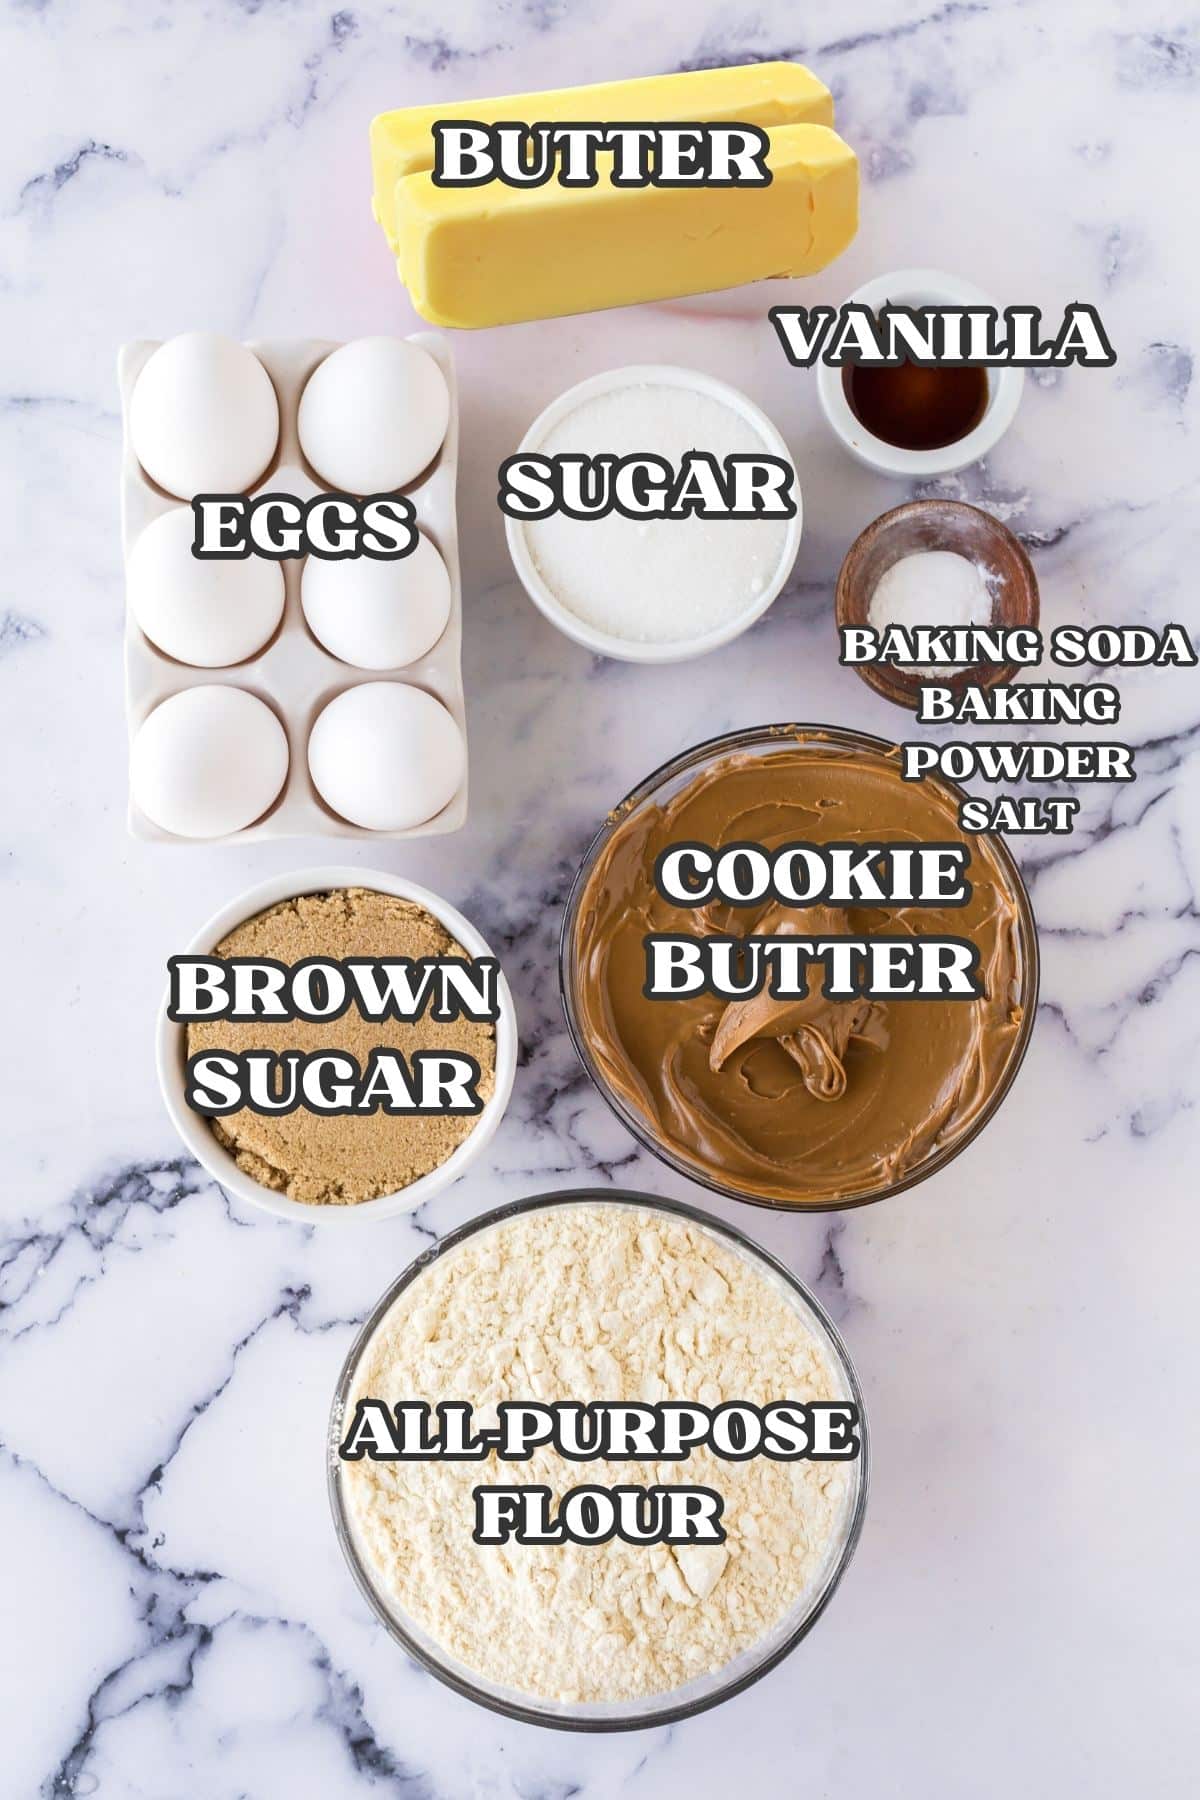 Labeled ingredients for stuffed cookie butter cookies.